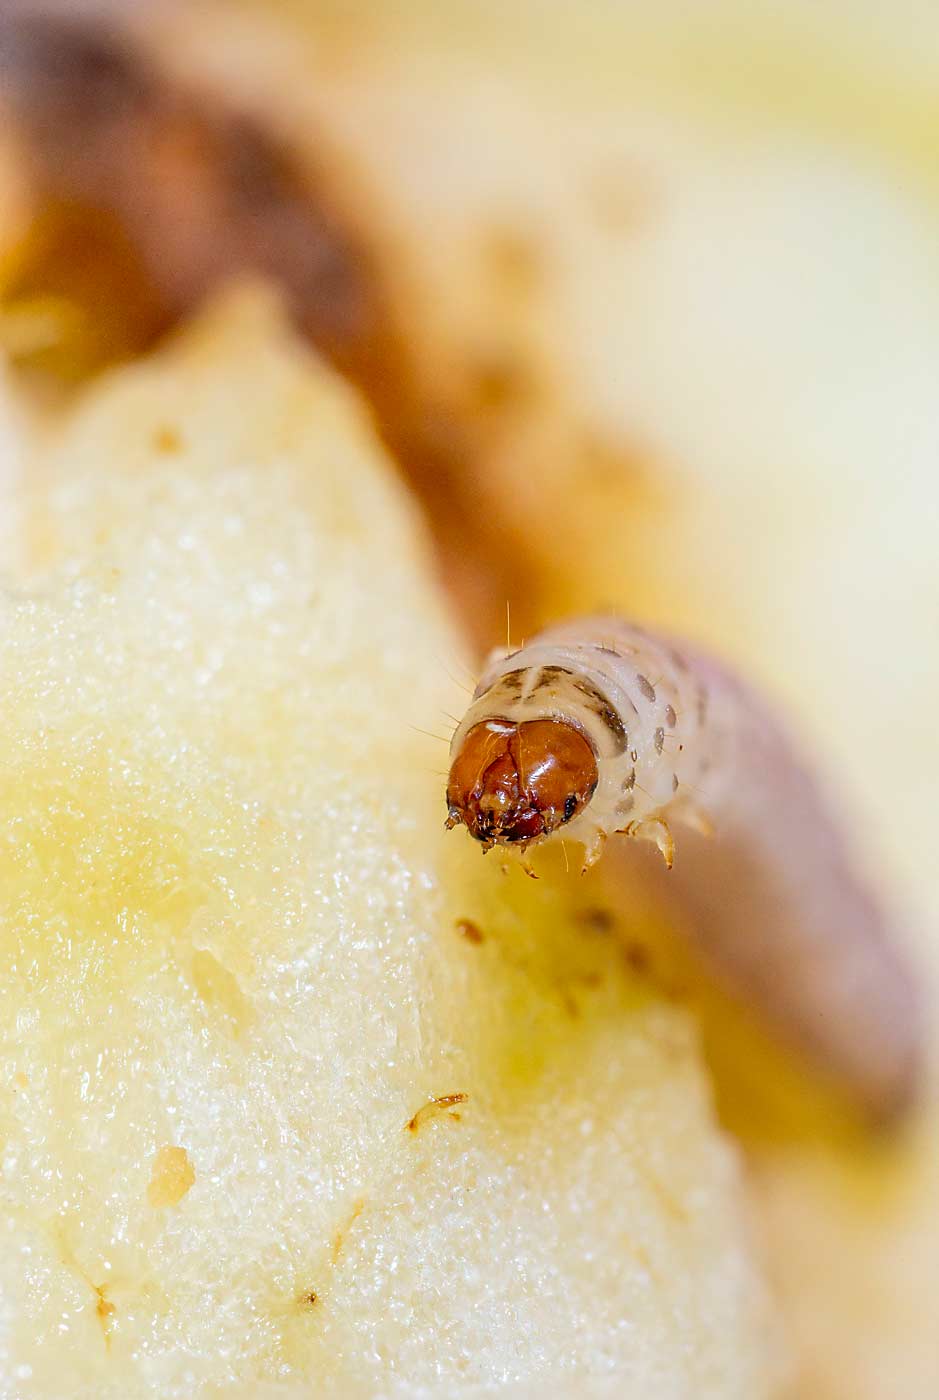 A codling moth larva on an apple. There’s a need for renewed attention on Washington’s No. 1 apple pest, according to leaders of a new industry task force. (TJ Mullinax/Good Fruit Grower)